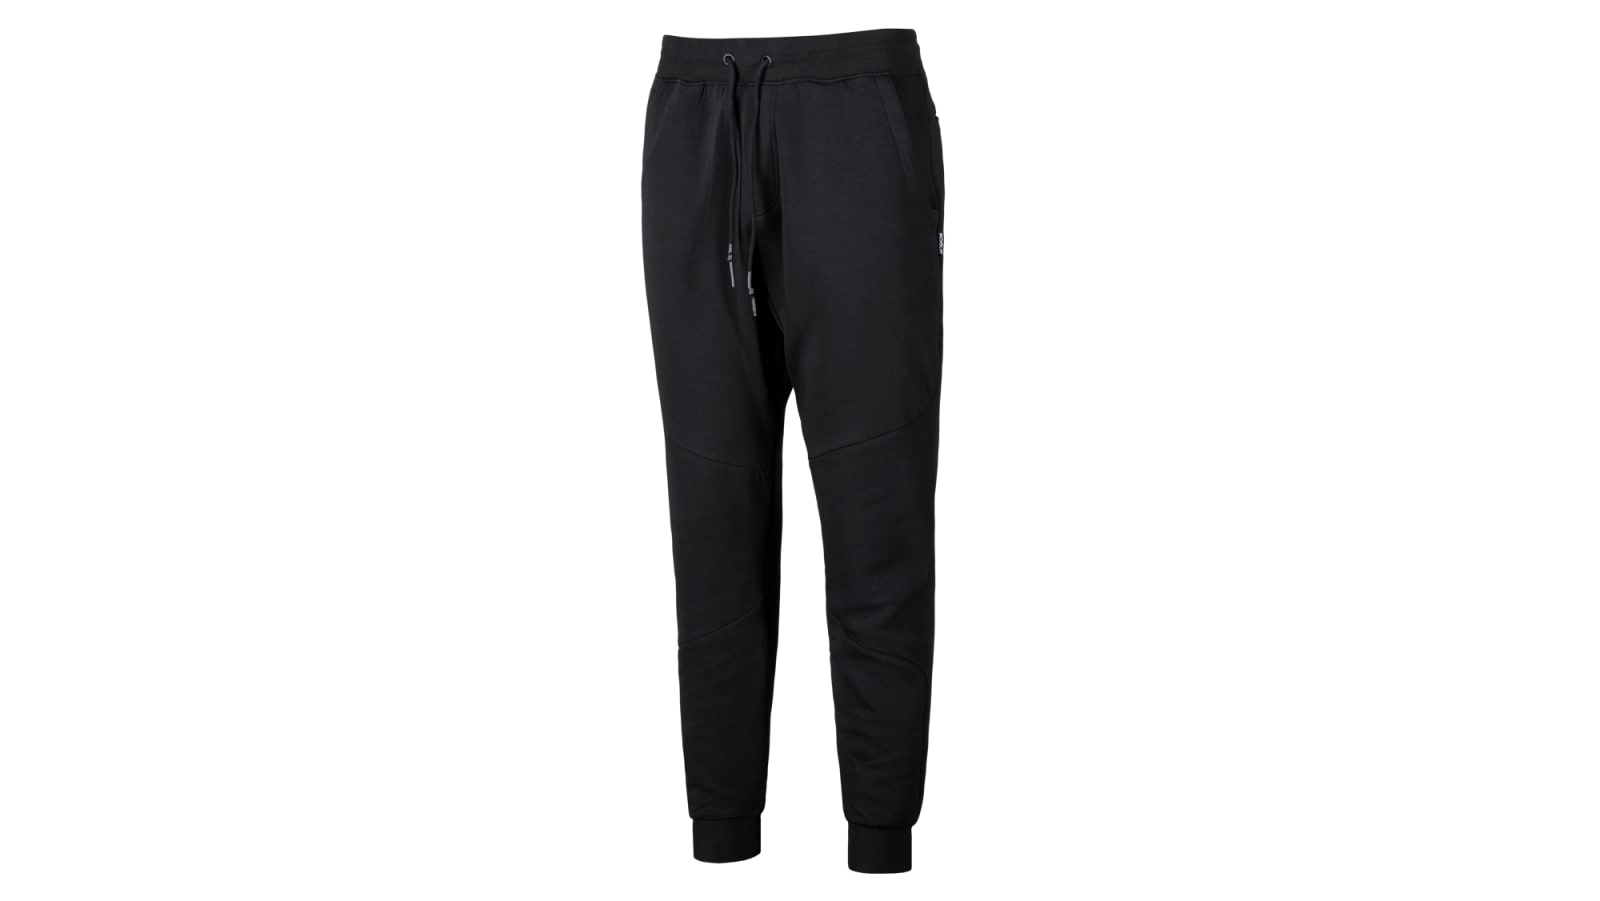 Mens Joggers Casual Pants Fitness Men Sportswear Tracksuit Bottoms Skinny Sweatpants  Trousers Black Gyms Jogger Track Pants L 4XL From Xinxin985985, $19.29